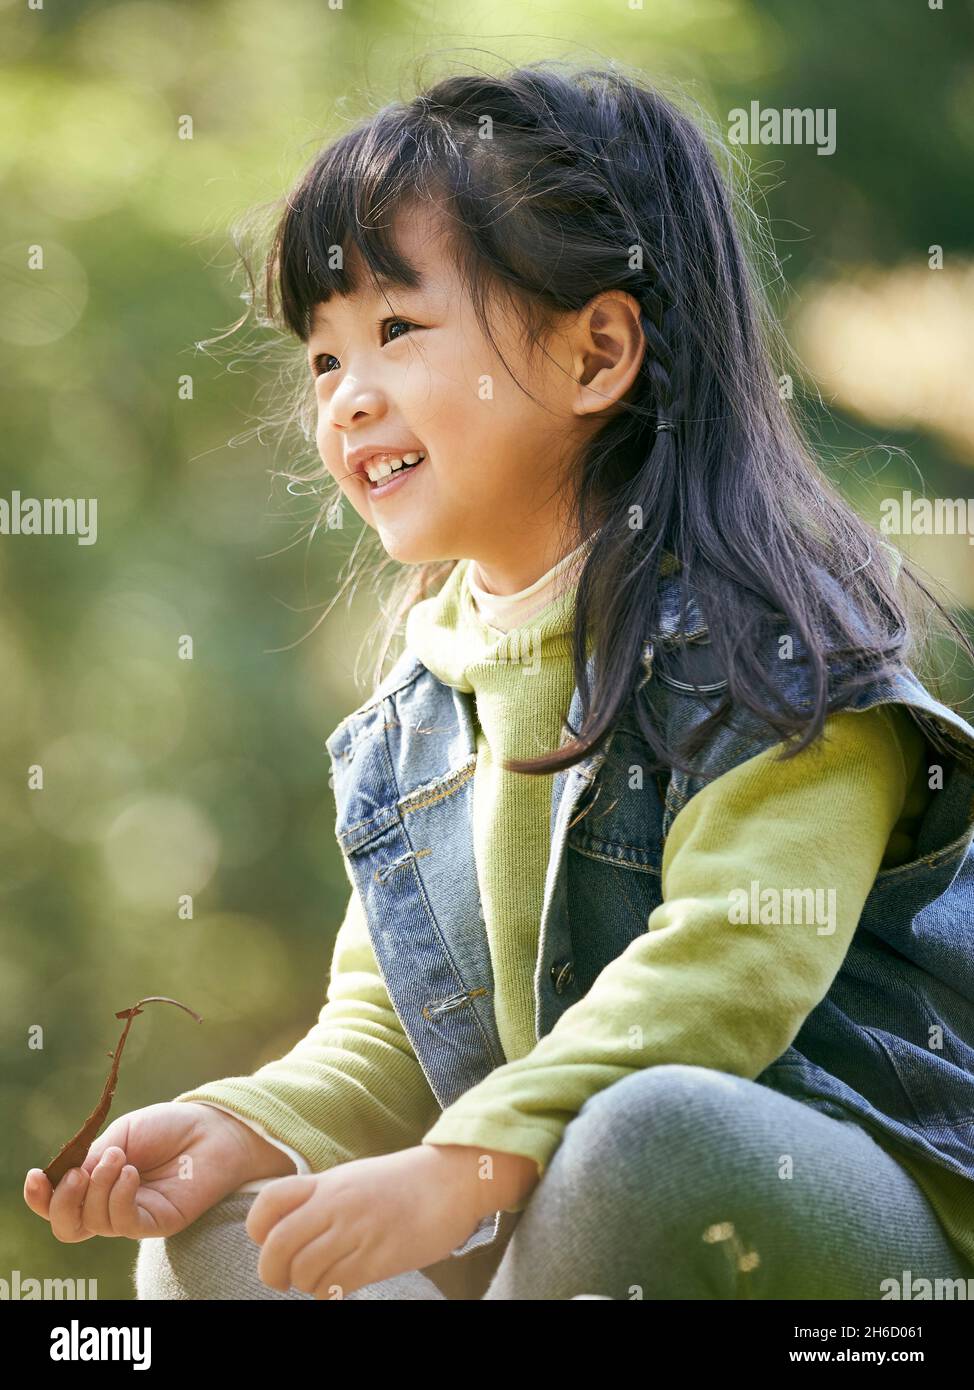 outdoor portrait of an asian little girl sitting on grass happy and smiling Stock Photo